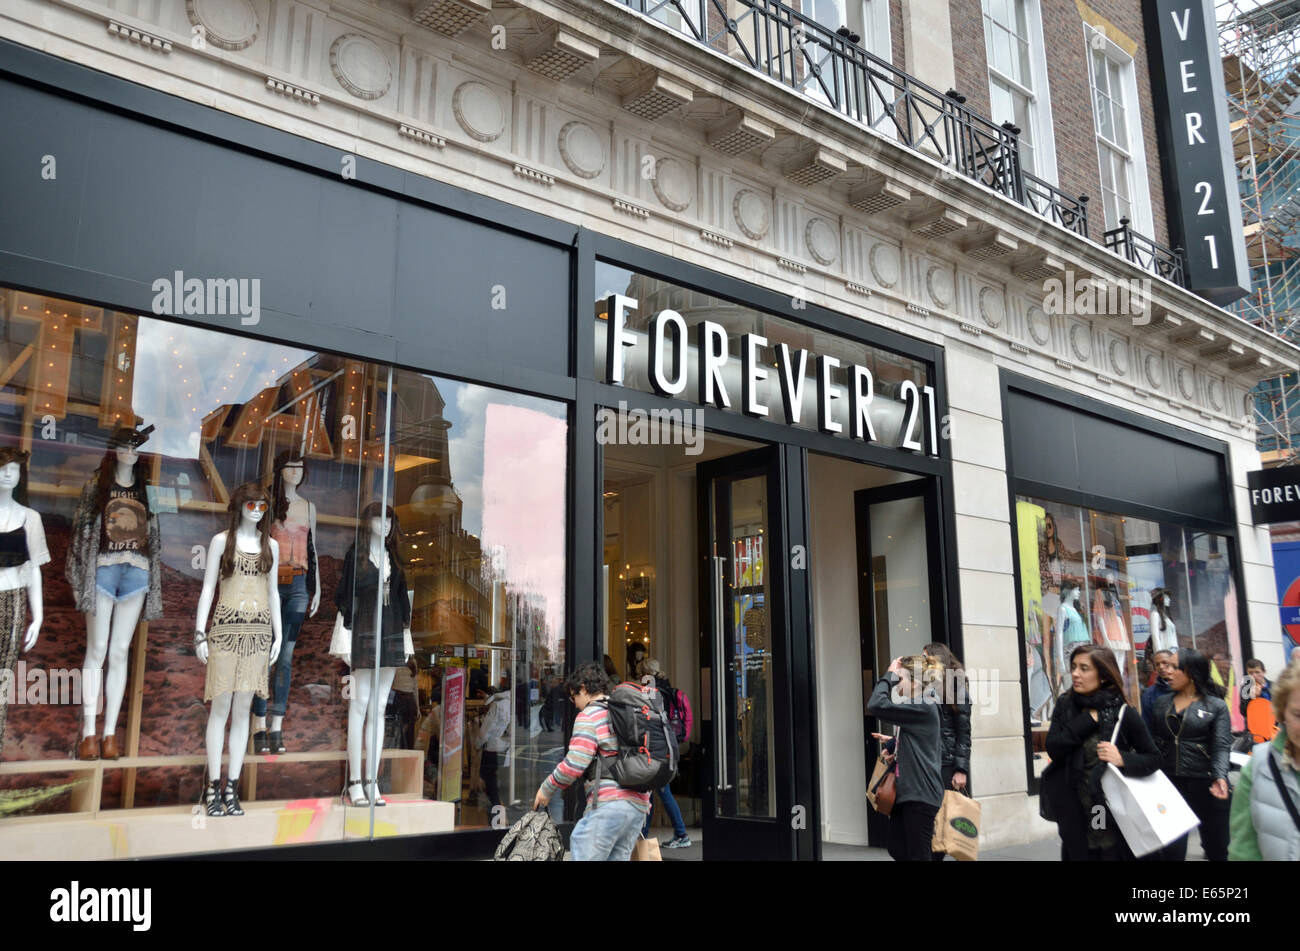 Forever 21 fashion store in Oxford Street, London, UK Stock Photo - Alamy